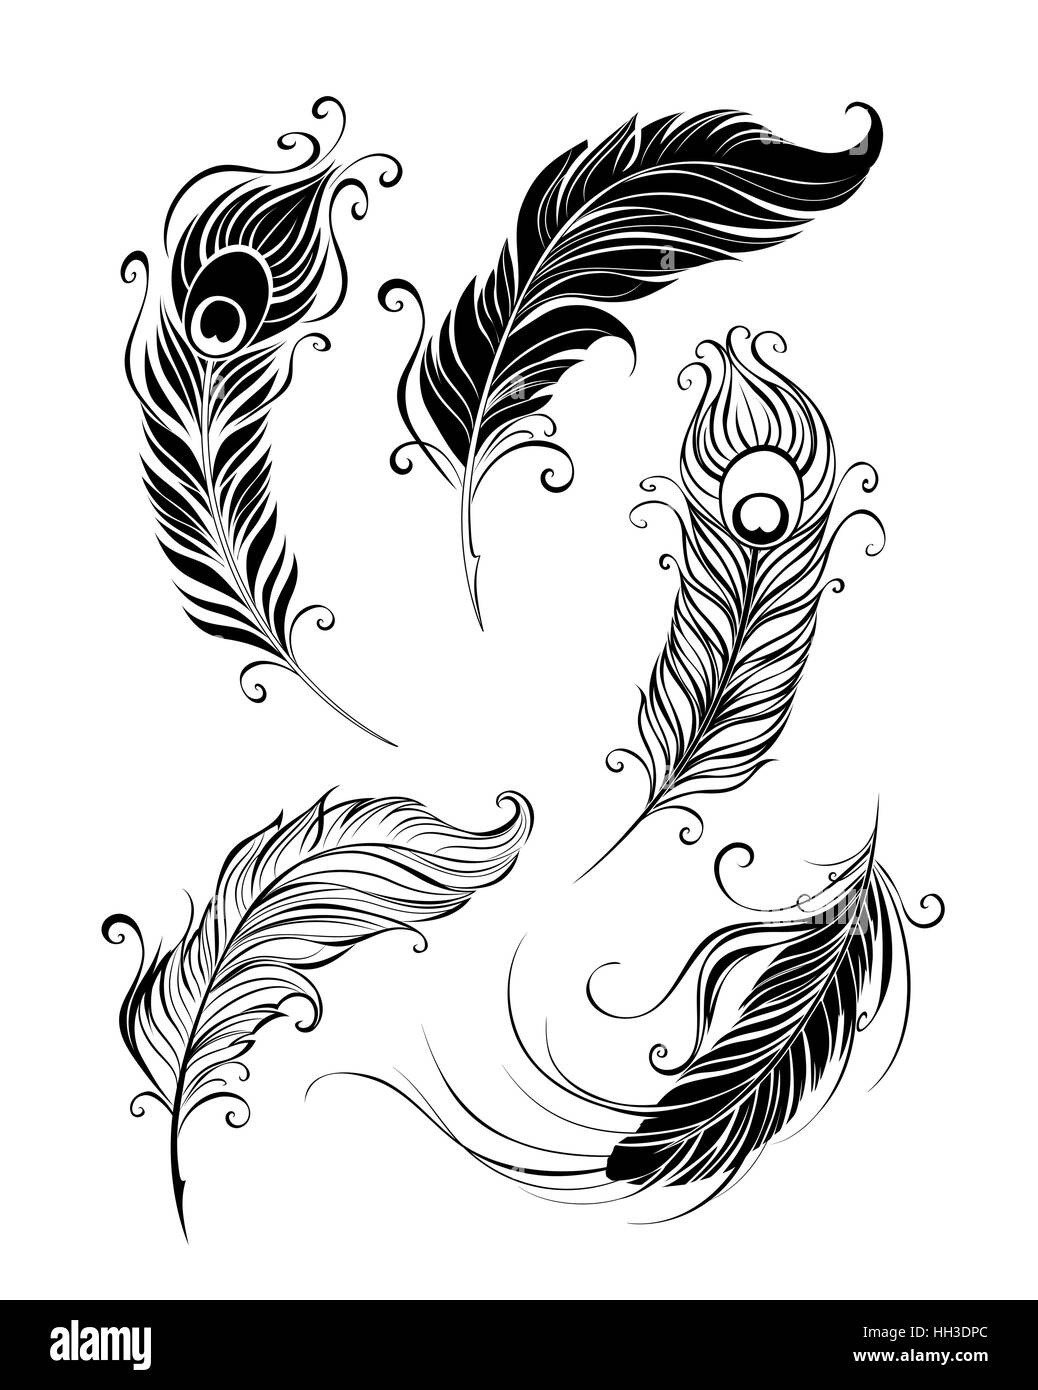 Peacock Feather Tattoos Designs, Ideas and Meaning - Tattoos For You